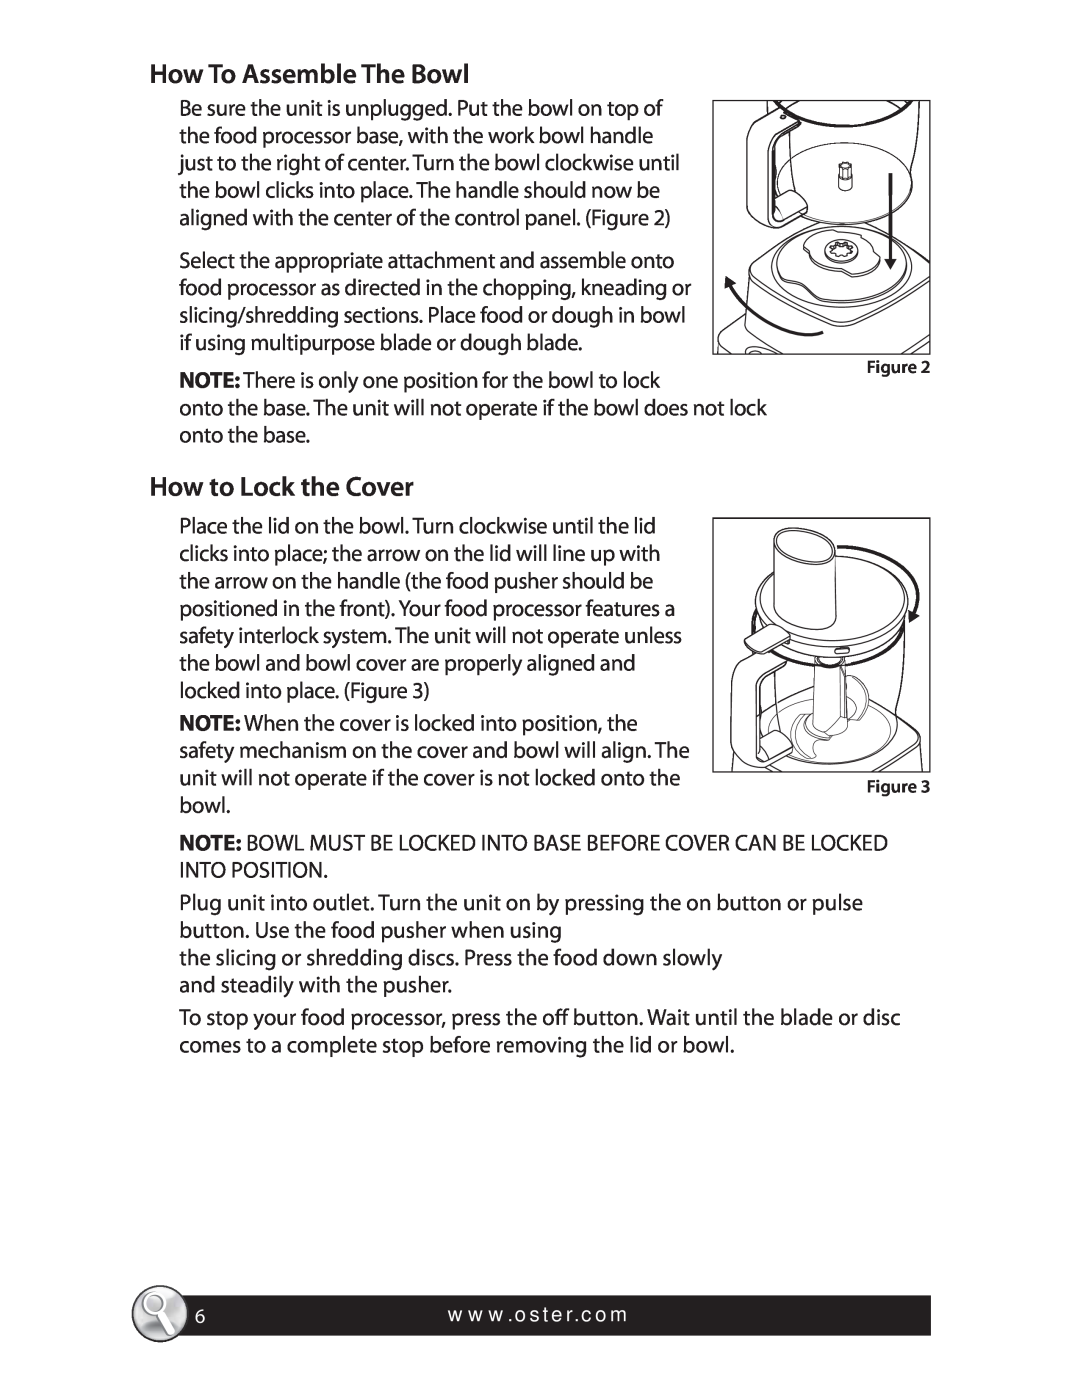 Oster 137299, SPR-121409, FPSTFP4600 warranty How To Assemble The Bowl, How to Lock the Cover 